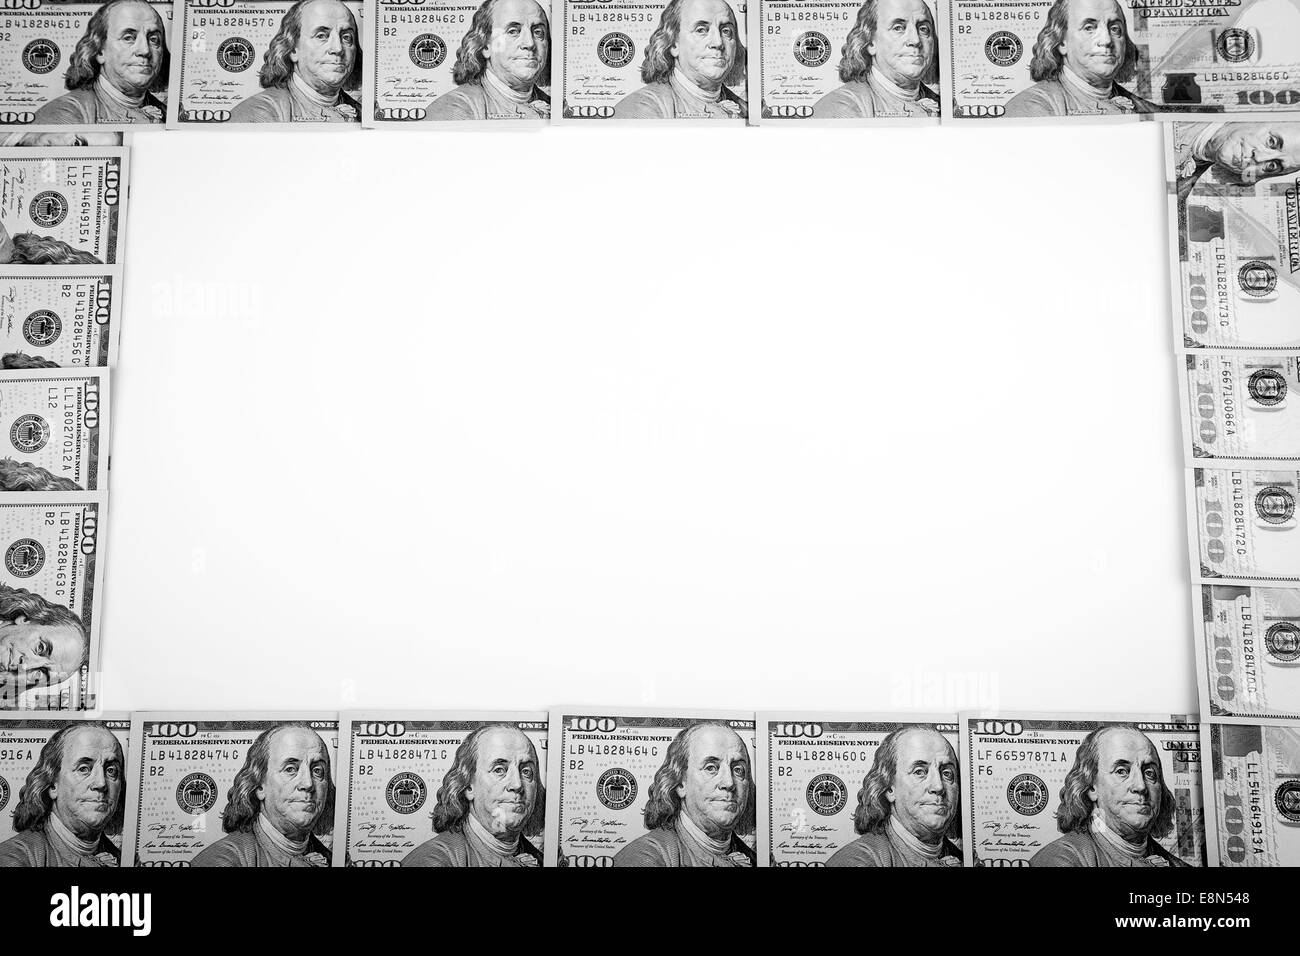 Dollars Photography: Frame of 100 dollars banknotes Stock Photo